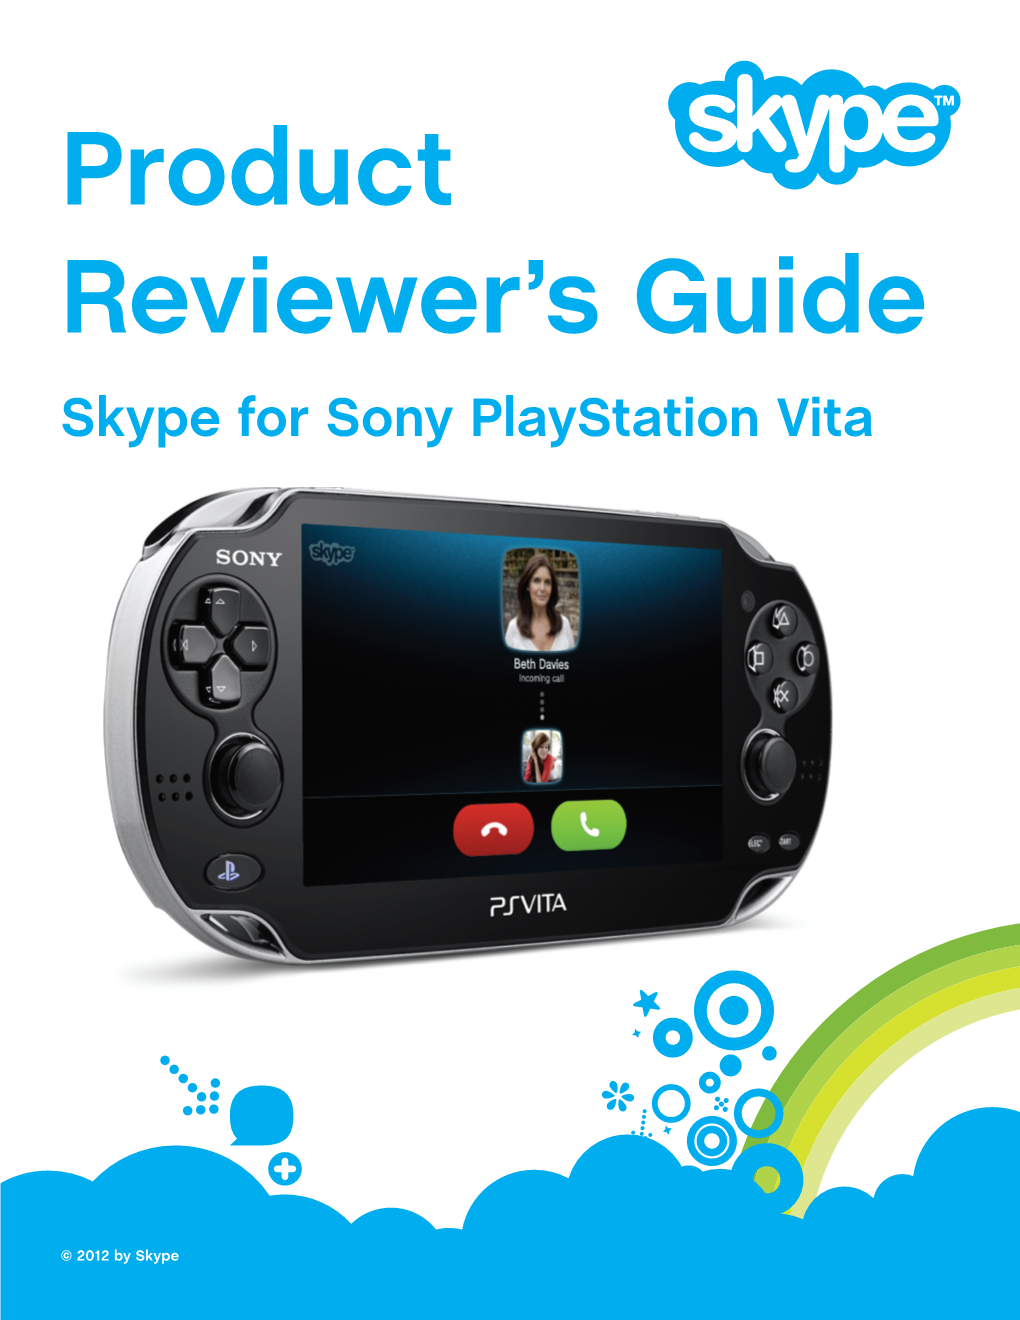 Product Reviewer's Guide